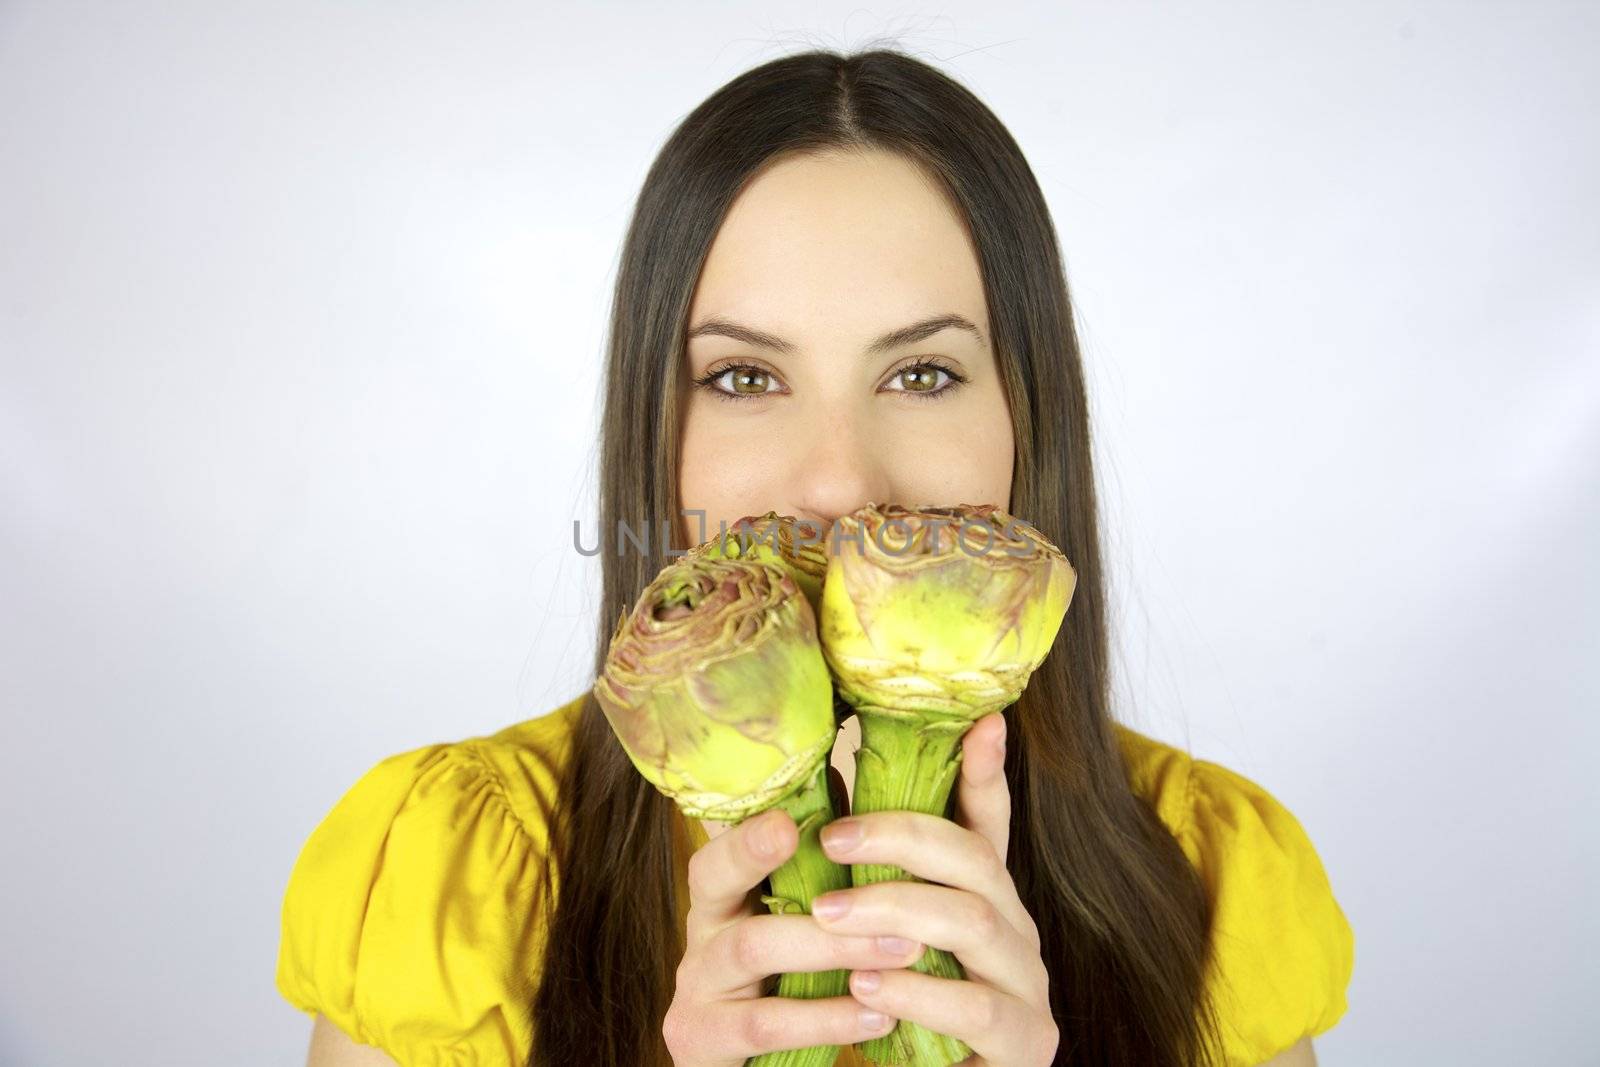 Female model with artichokes in her hands and yellow shirt